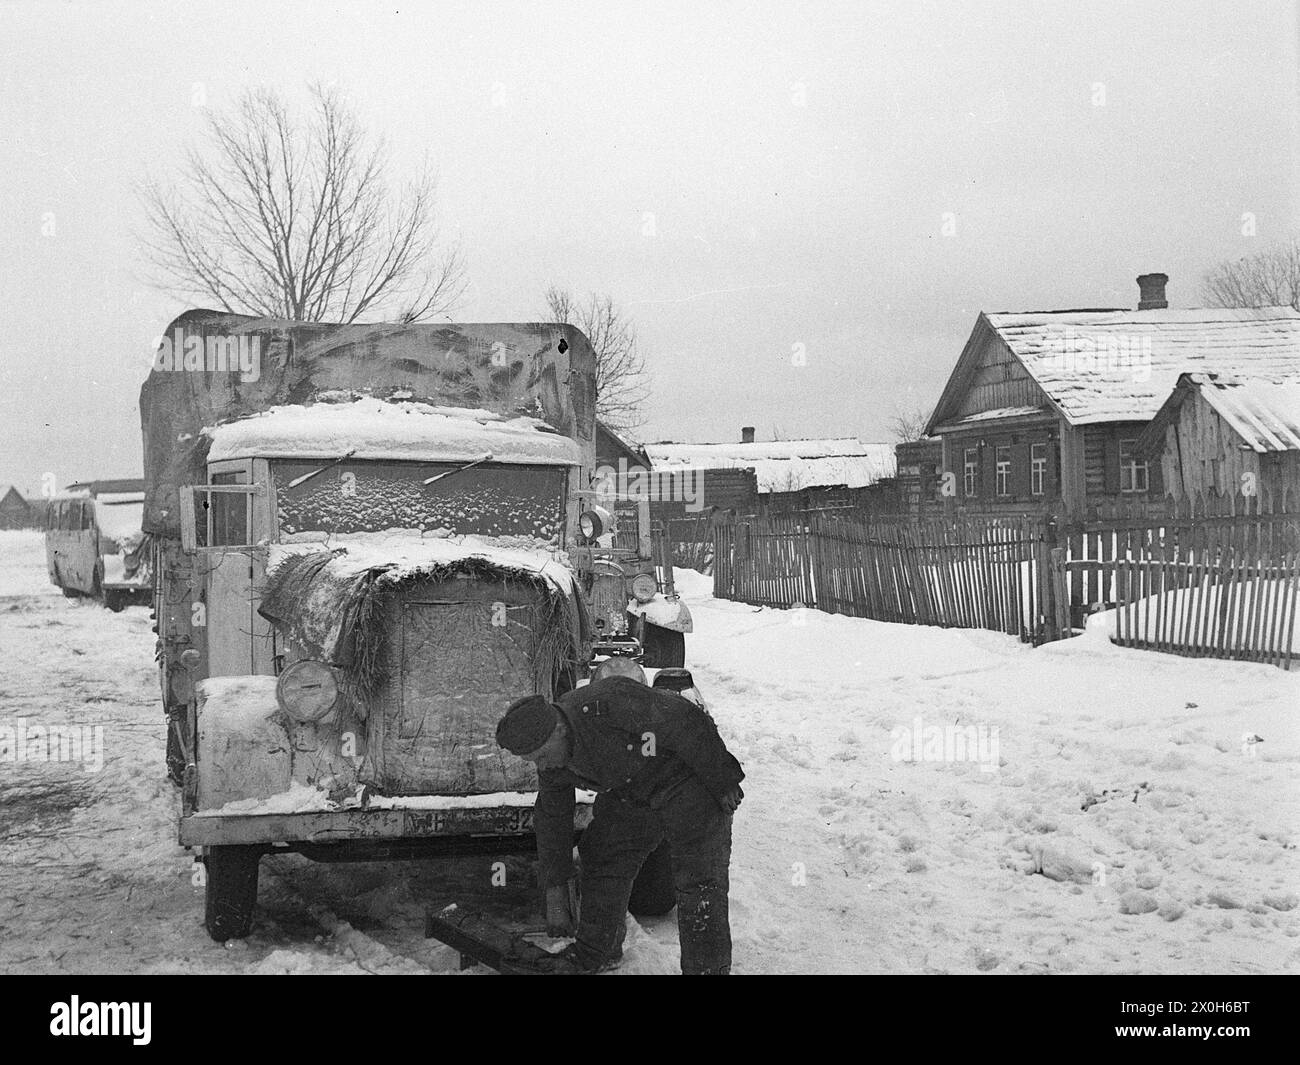 In order to start the car in the cold, a German soldier heats the engine and diesel fuel from below. The picture was taken by a member of the Radfahrgrenadierregiment 2 / Radfahrsicherungsregiment 2, in the northern section of the Eastern Front. [automated translation] Stock Photo